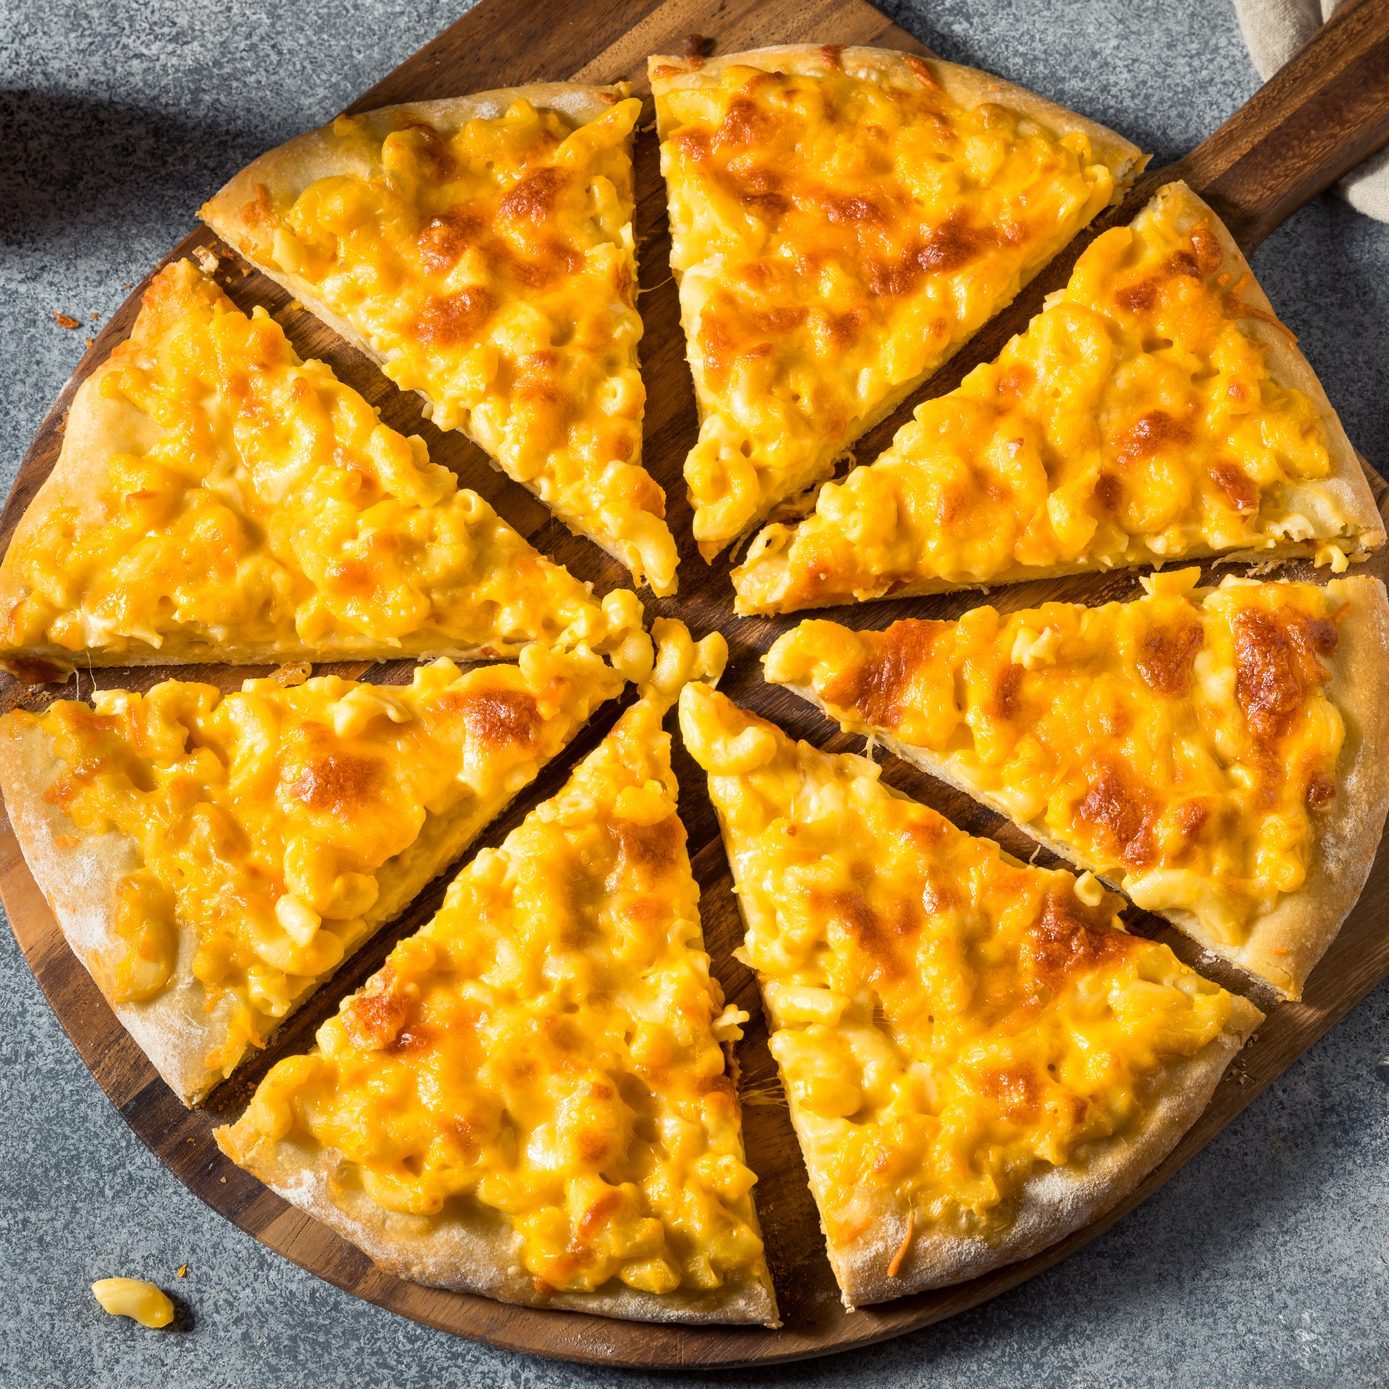 <p><span>This pizza combination is exactly how you imagine it: pizza dough loaded with ooey, gooey mac and cheese. If you love <a href="https://www.tasteofhome.com/recipes/amazing-mac-cheese-pizza/">pizza and mac and cheese</a>, then you won't hate putting the two together. Just get ready for a serious carbo-load.</span></p>